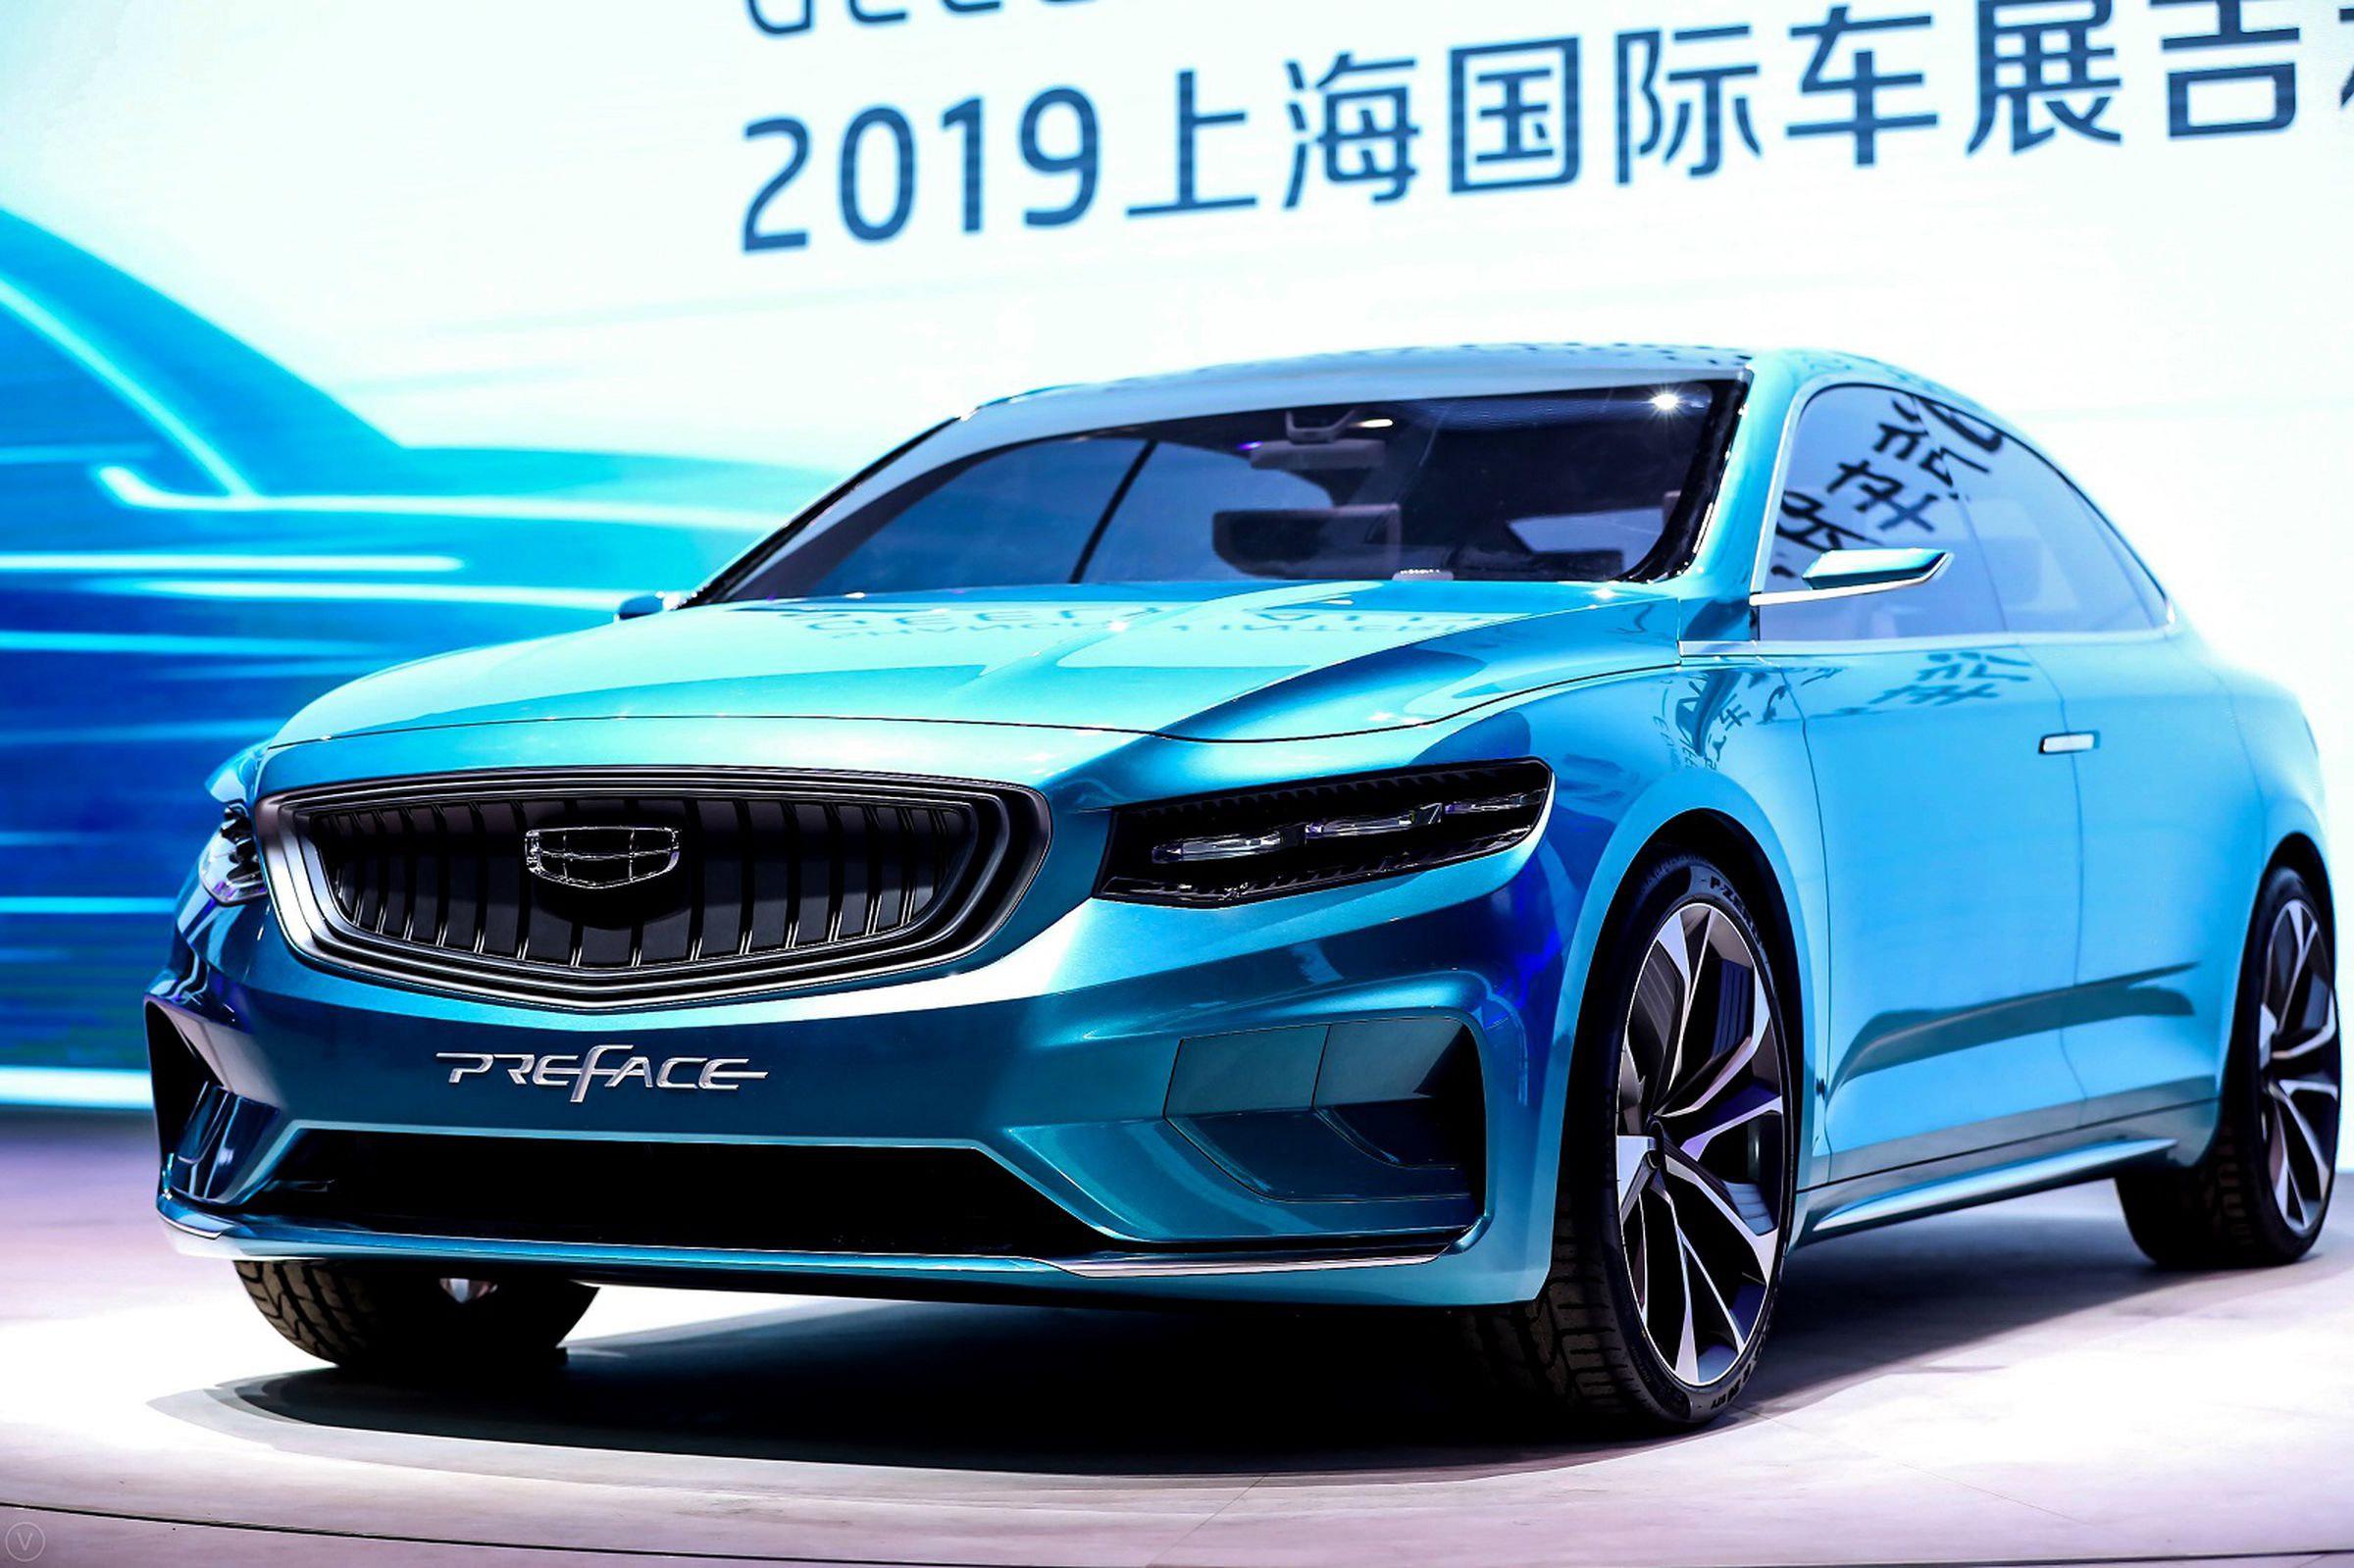 Geely’s Preface concept is built on the same platform as Volvo’s XC40 SUV.